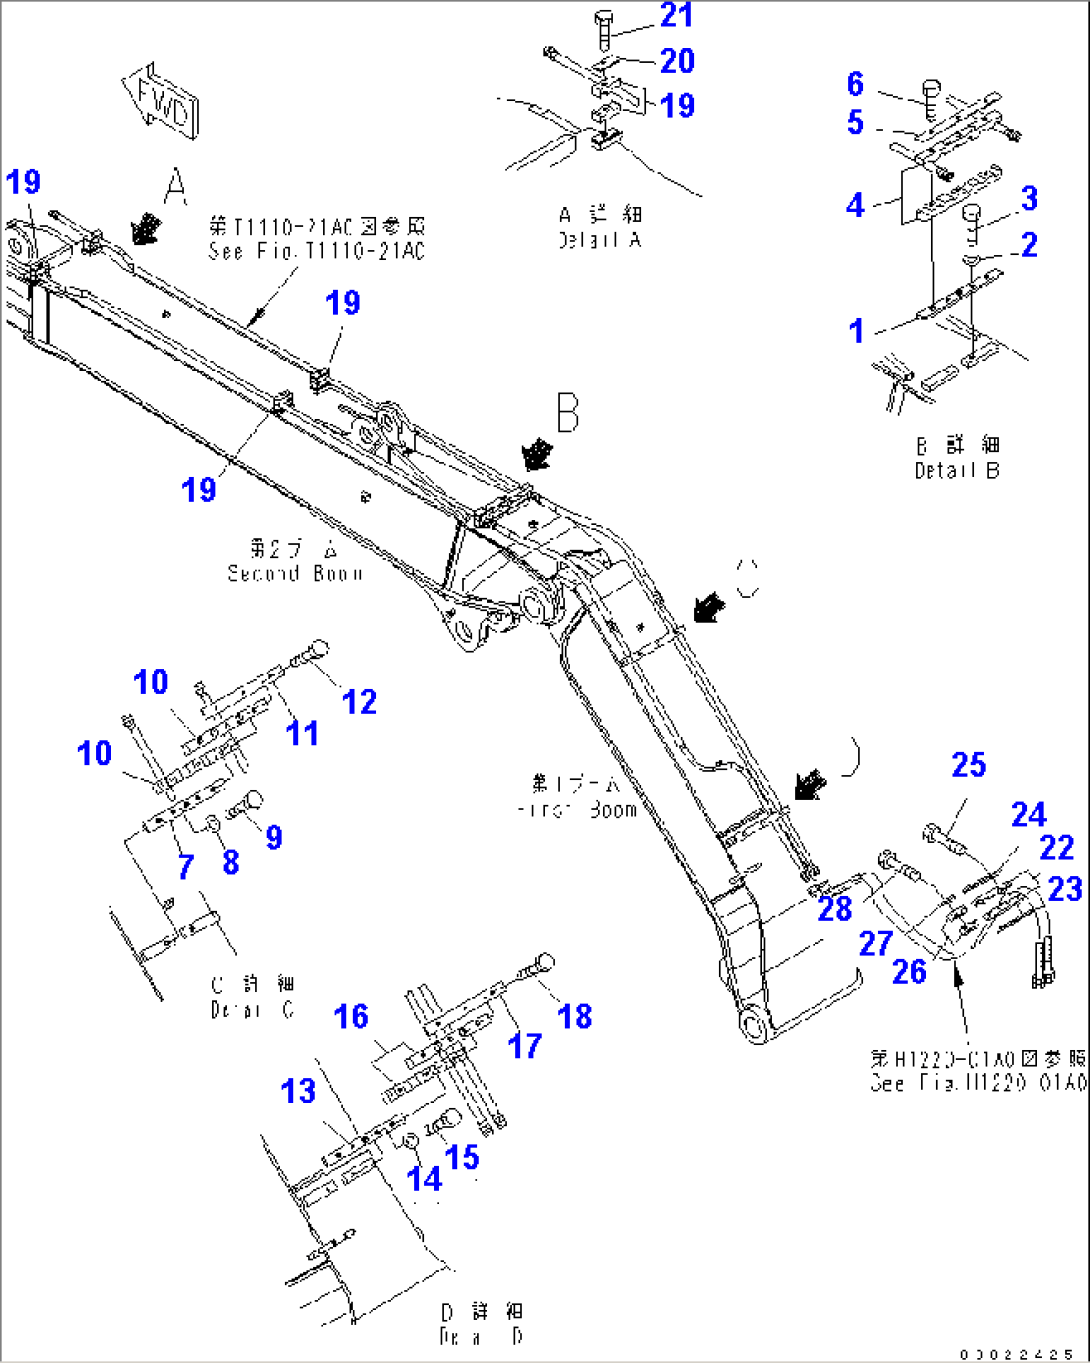 2-PIECE BOOM (ADDITIONAL PIPING) (CLAMSHELL LINE) (CLAMP)